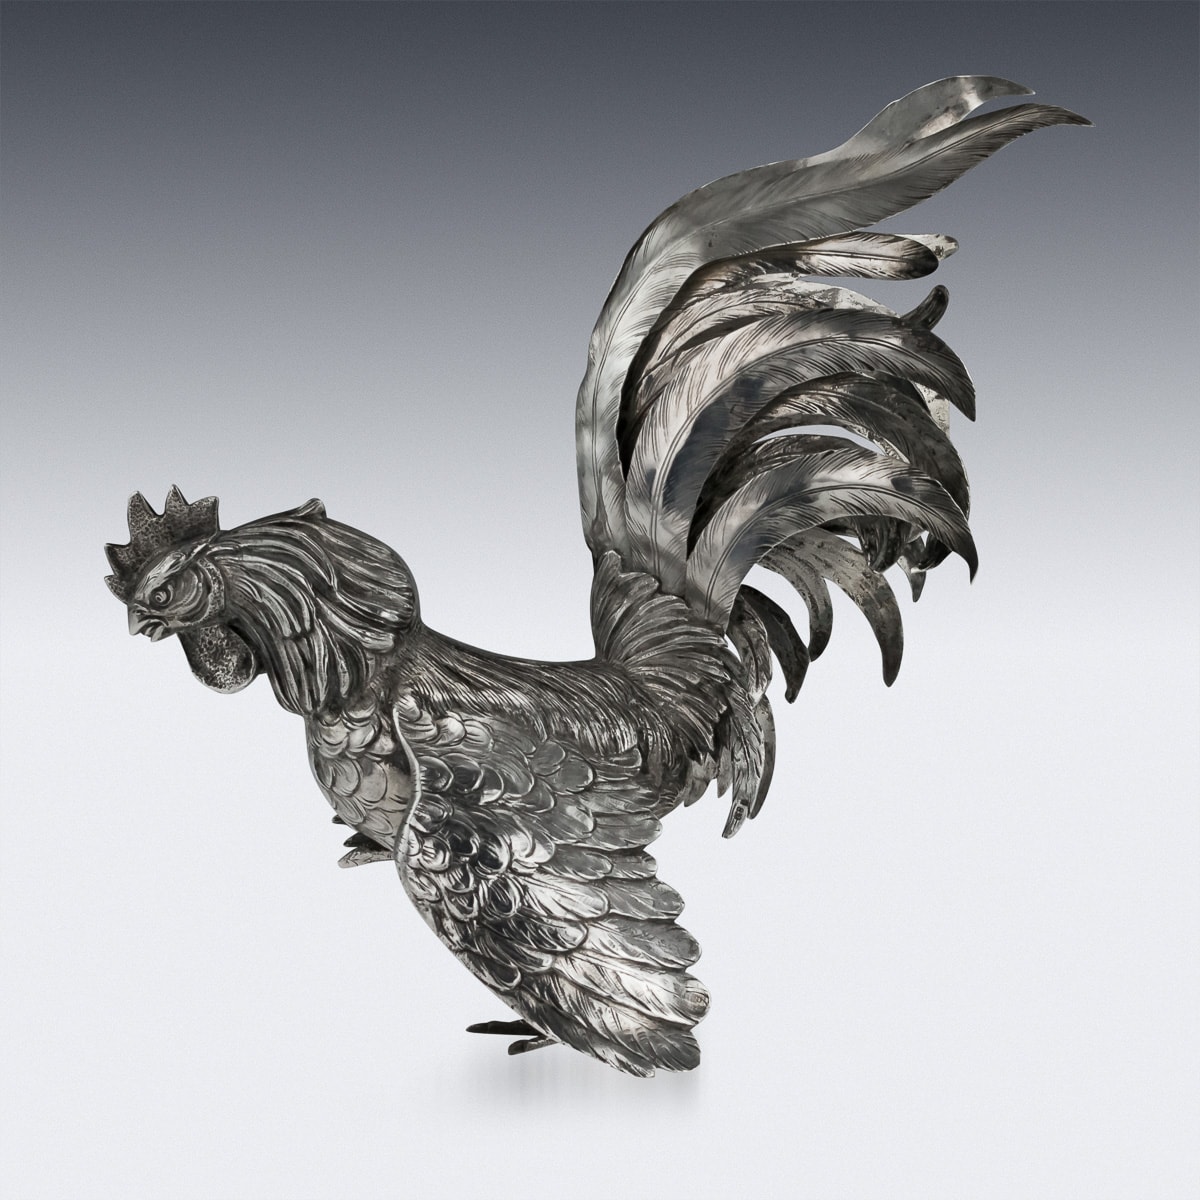 A PAIR OF GERMAN SILVER TABLE ORNAMENTS MODELLED AS FIGHTING COCKERELS - Image 28 of 41